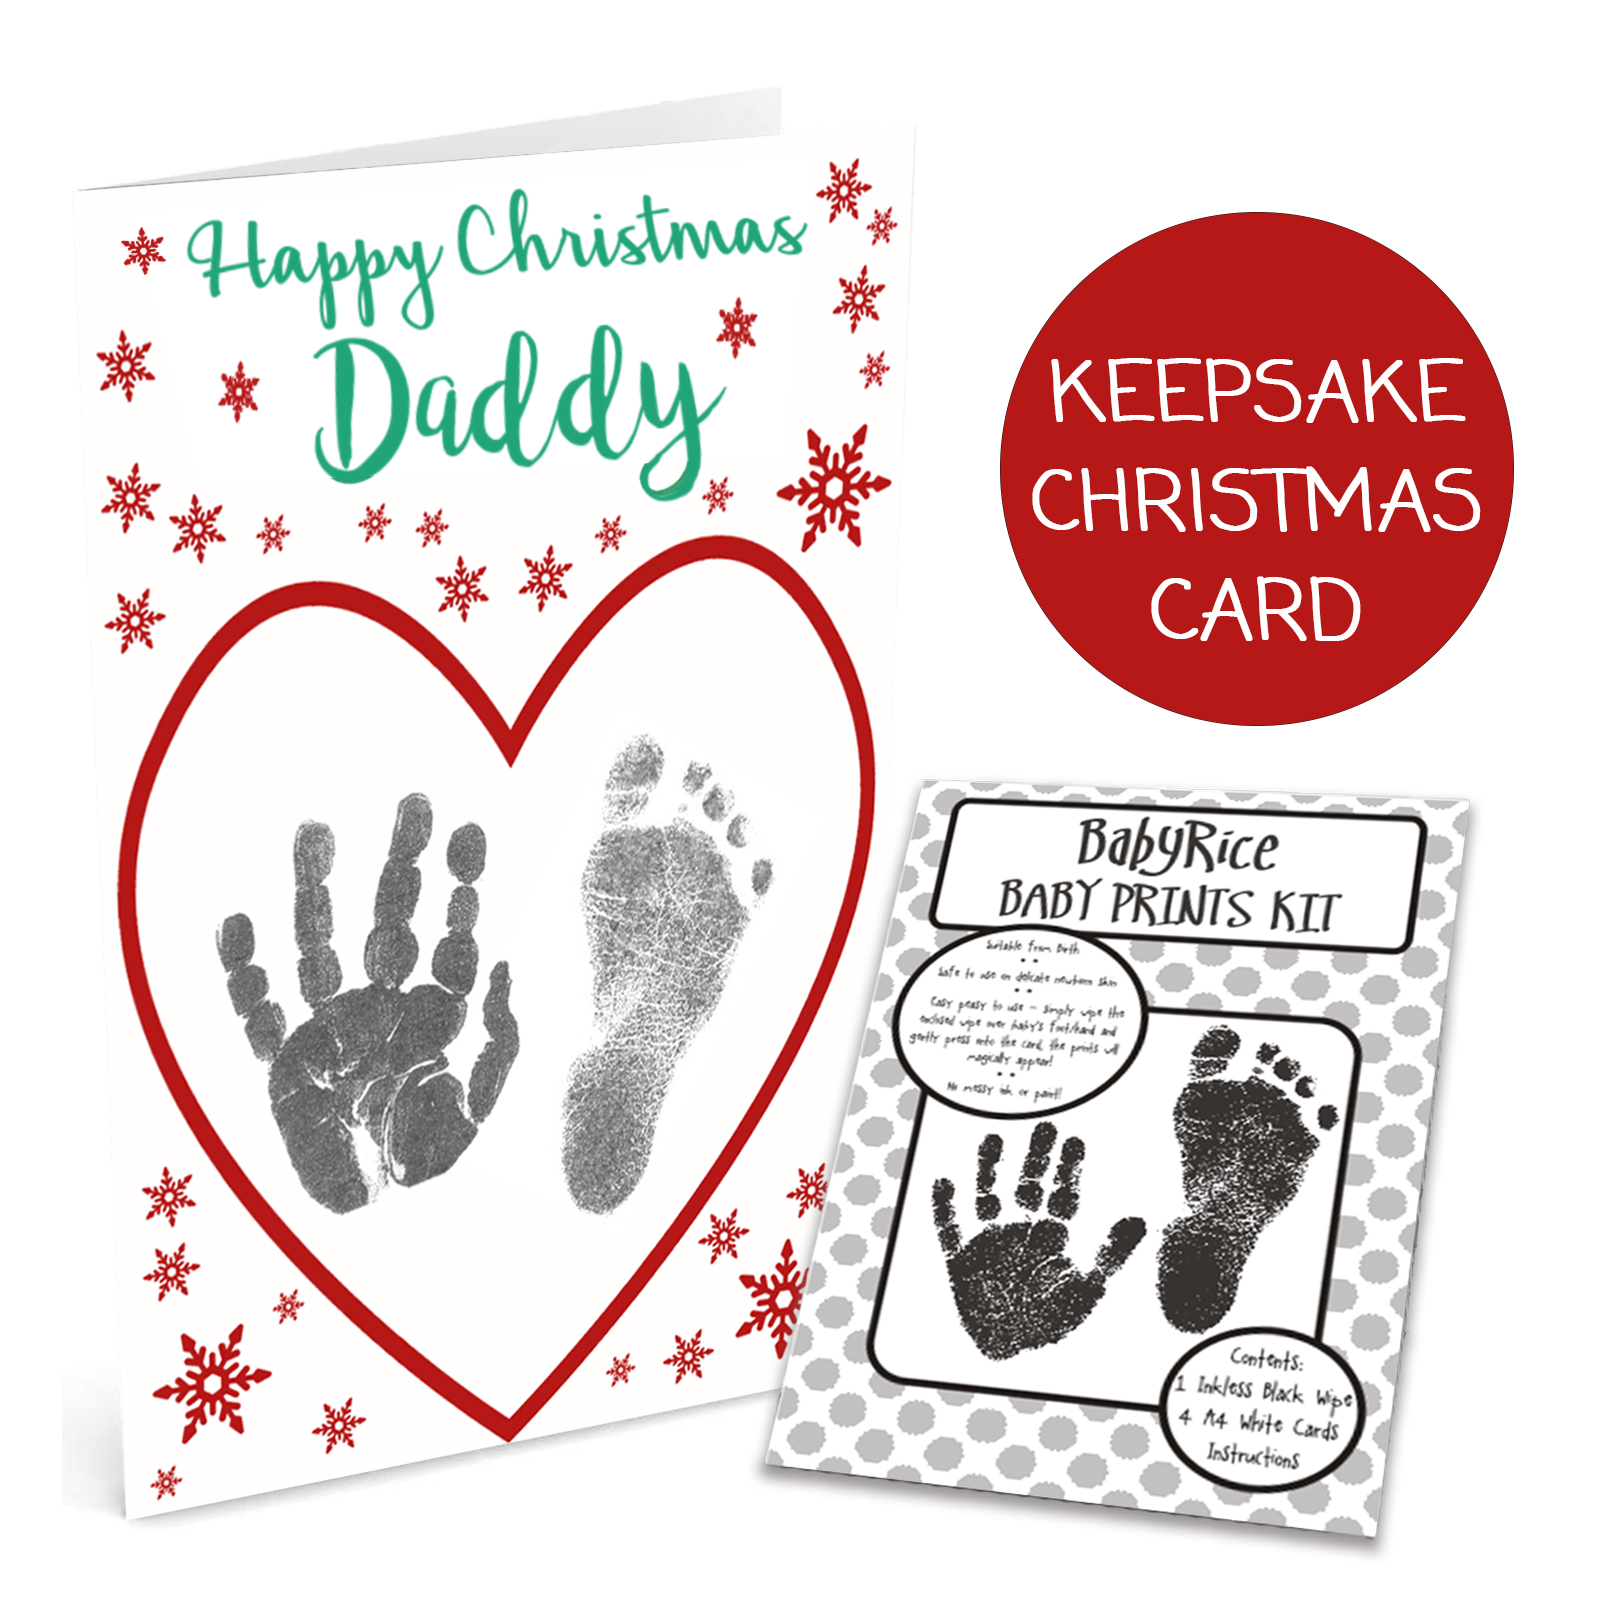 Happy Christmas Daddy Card from Baby Personalise with Hand Footprint